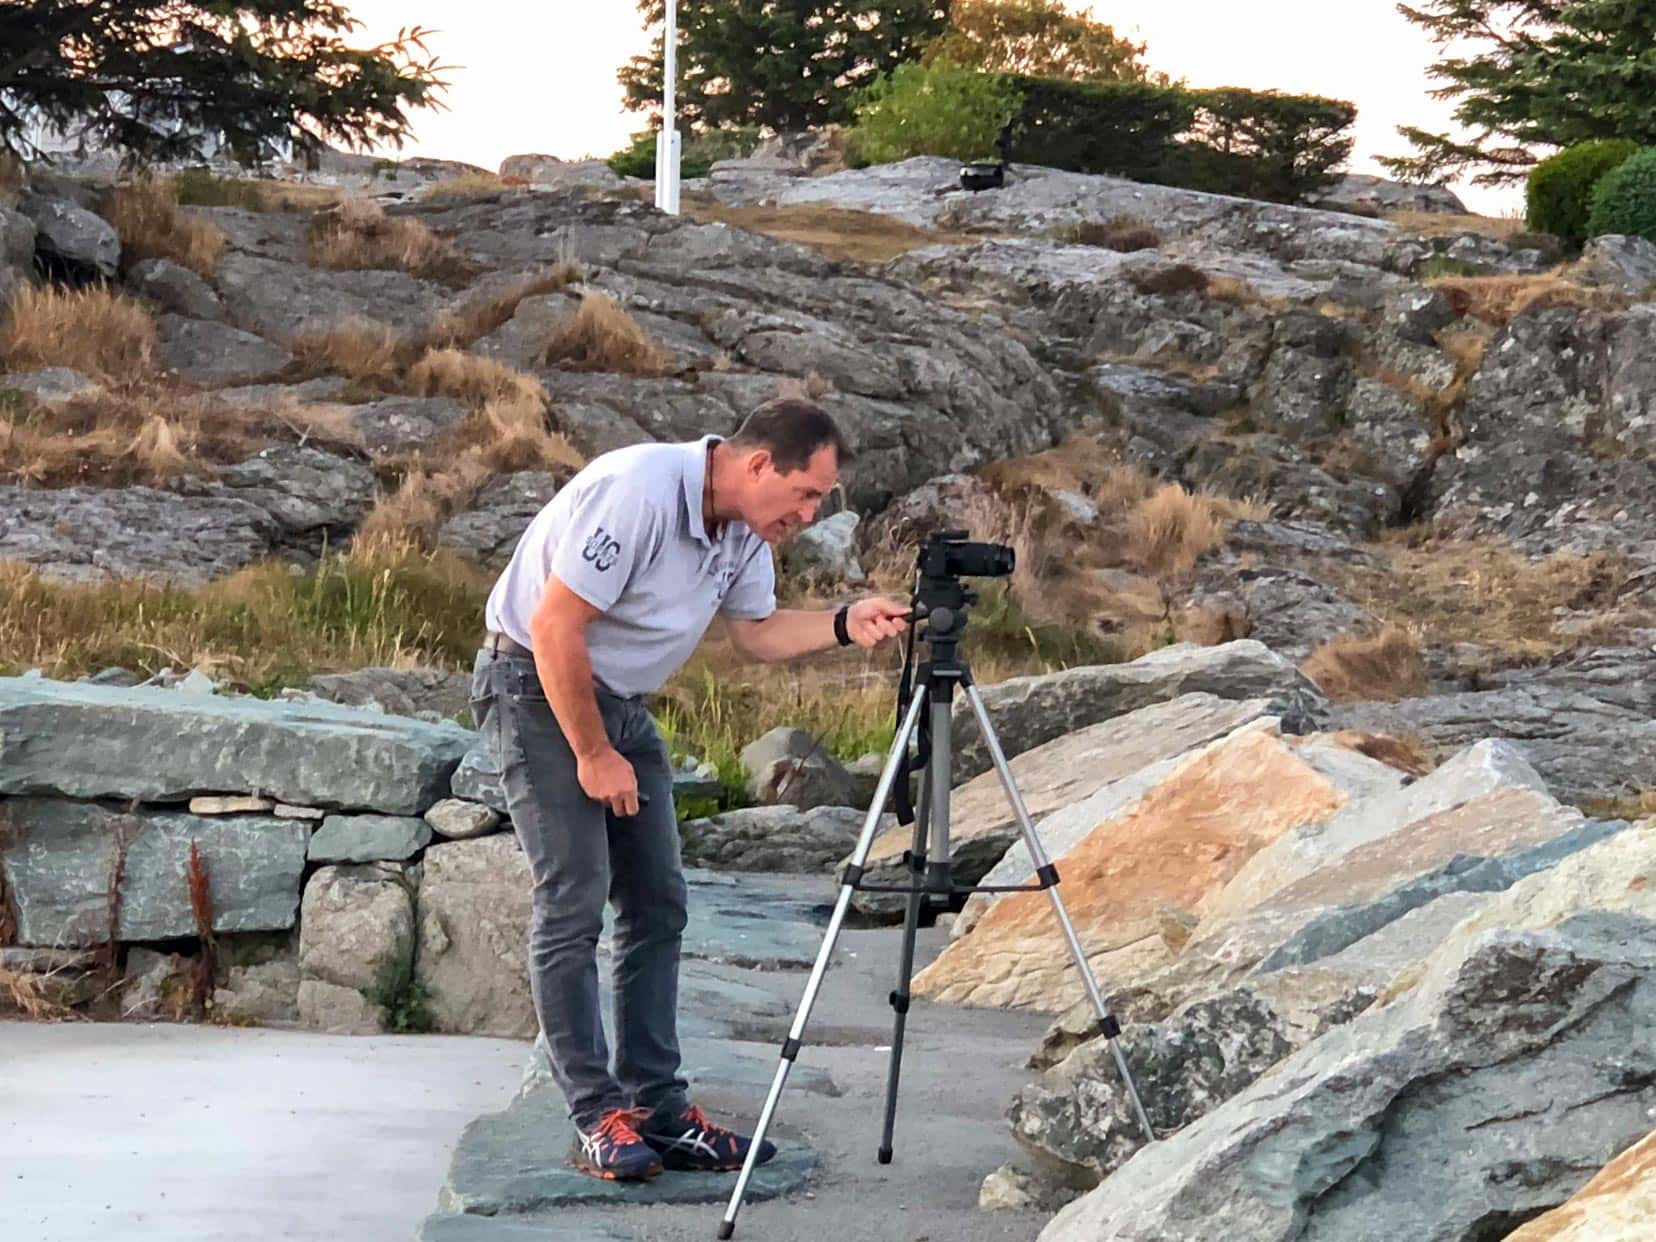 Shooting astrophotography Sony a6000: Checking and double-checking the camera settings and composition  